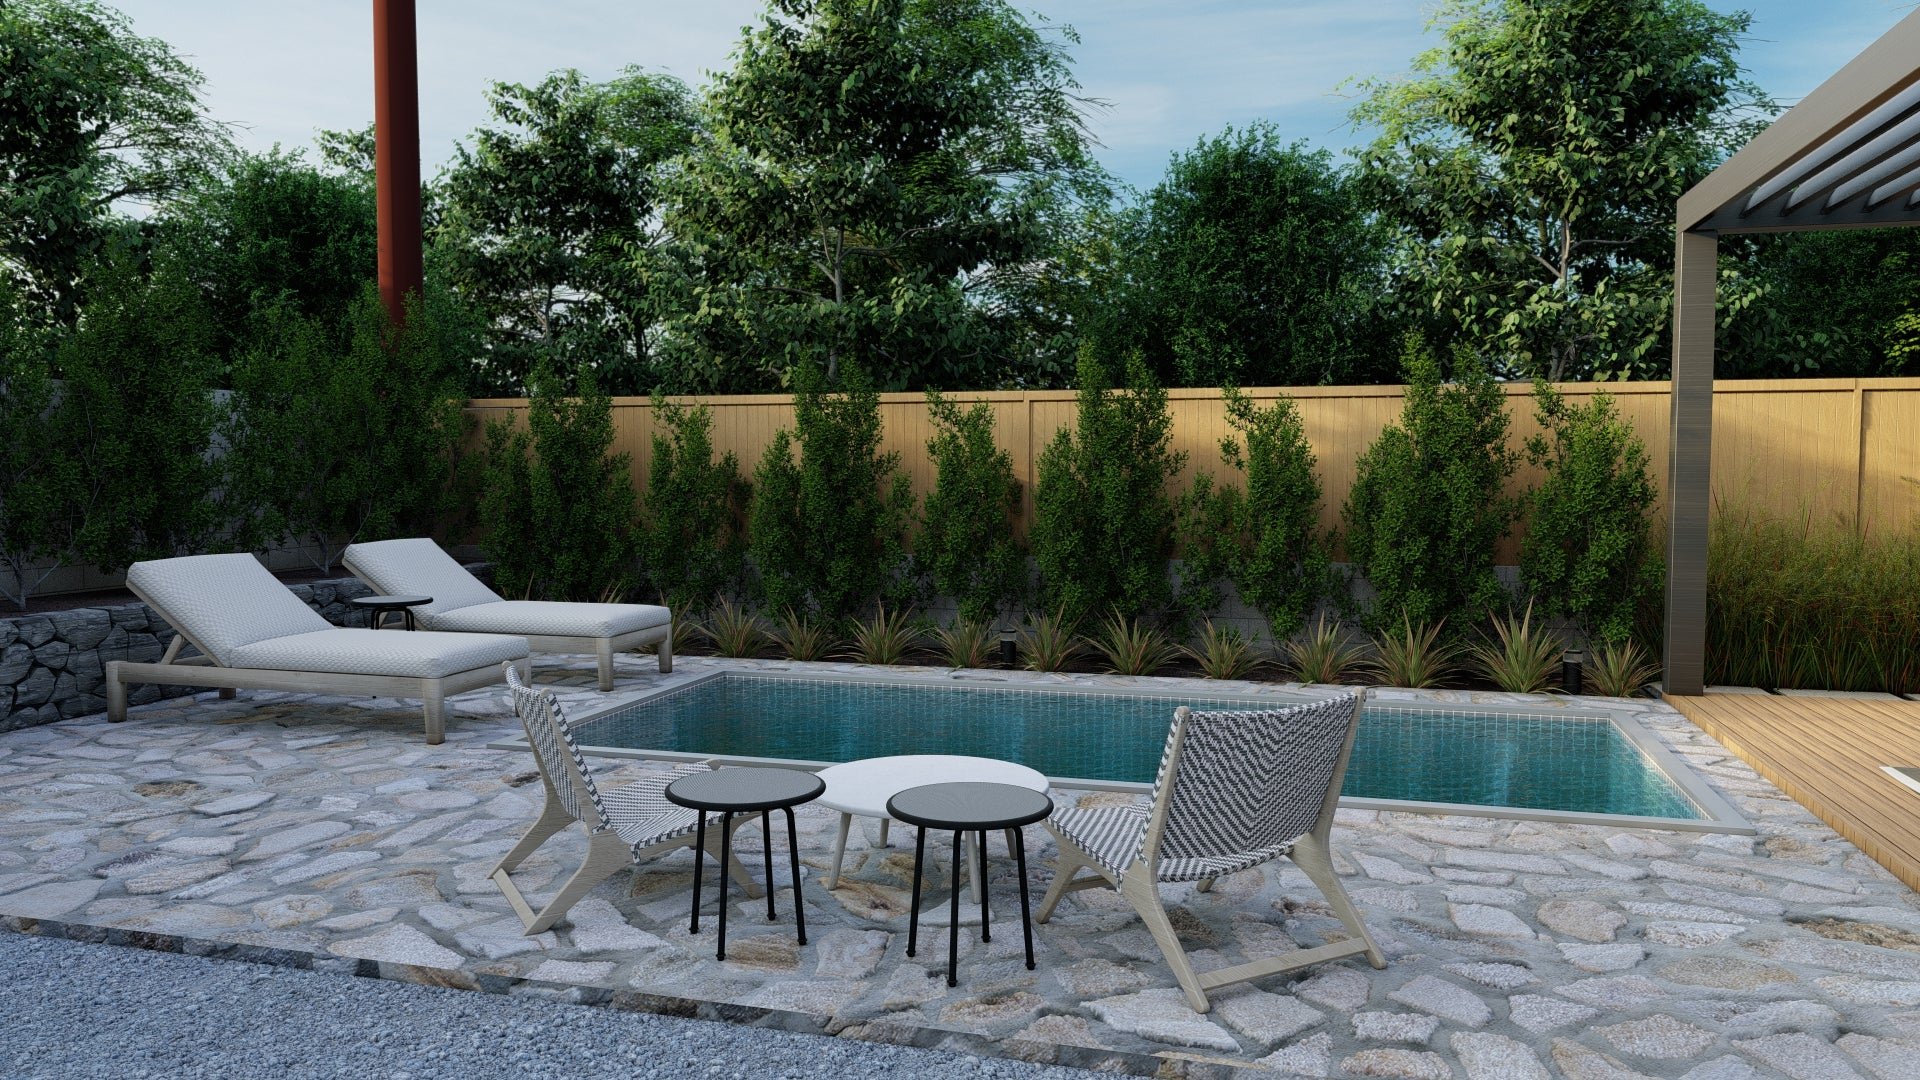 small backyard design with natural stone hardscaping with seating around a plunge pool